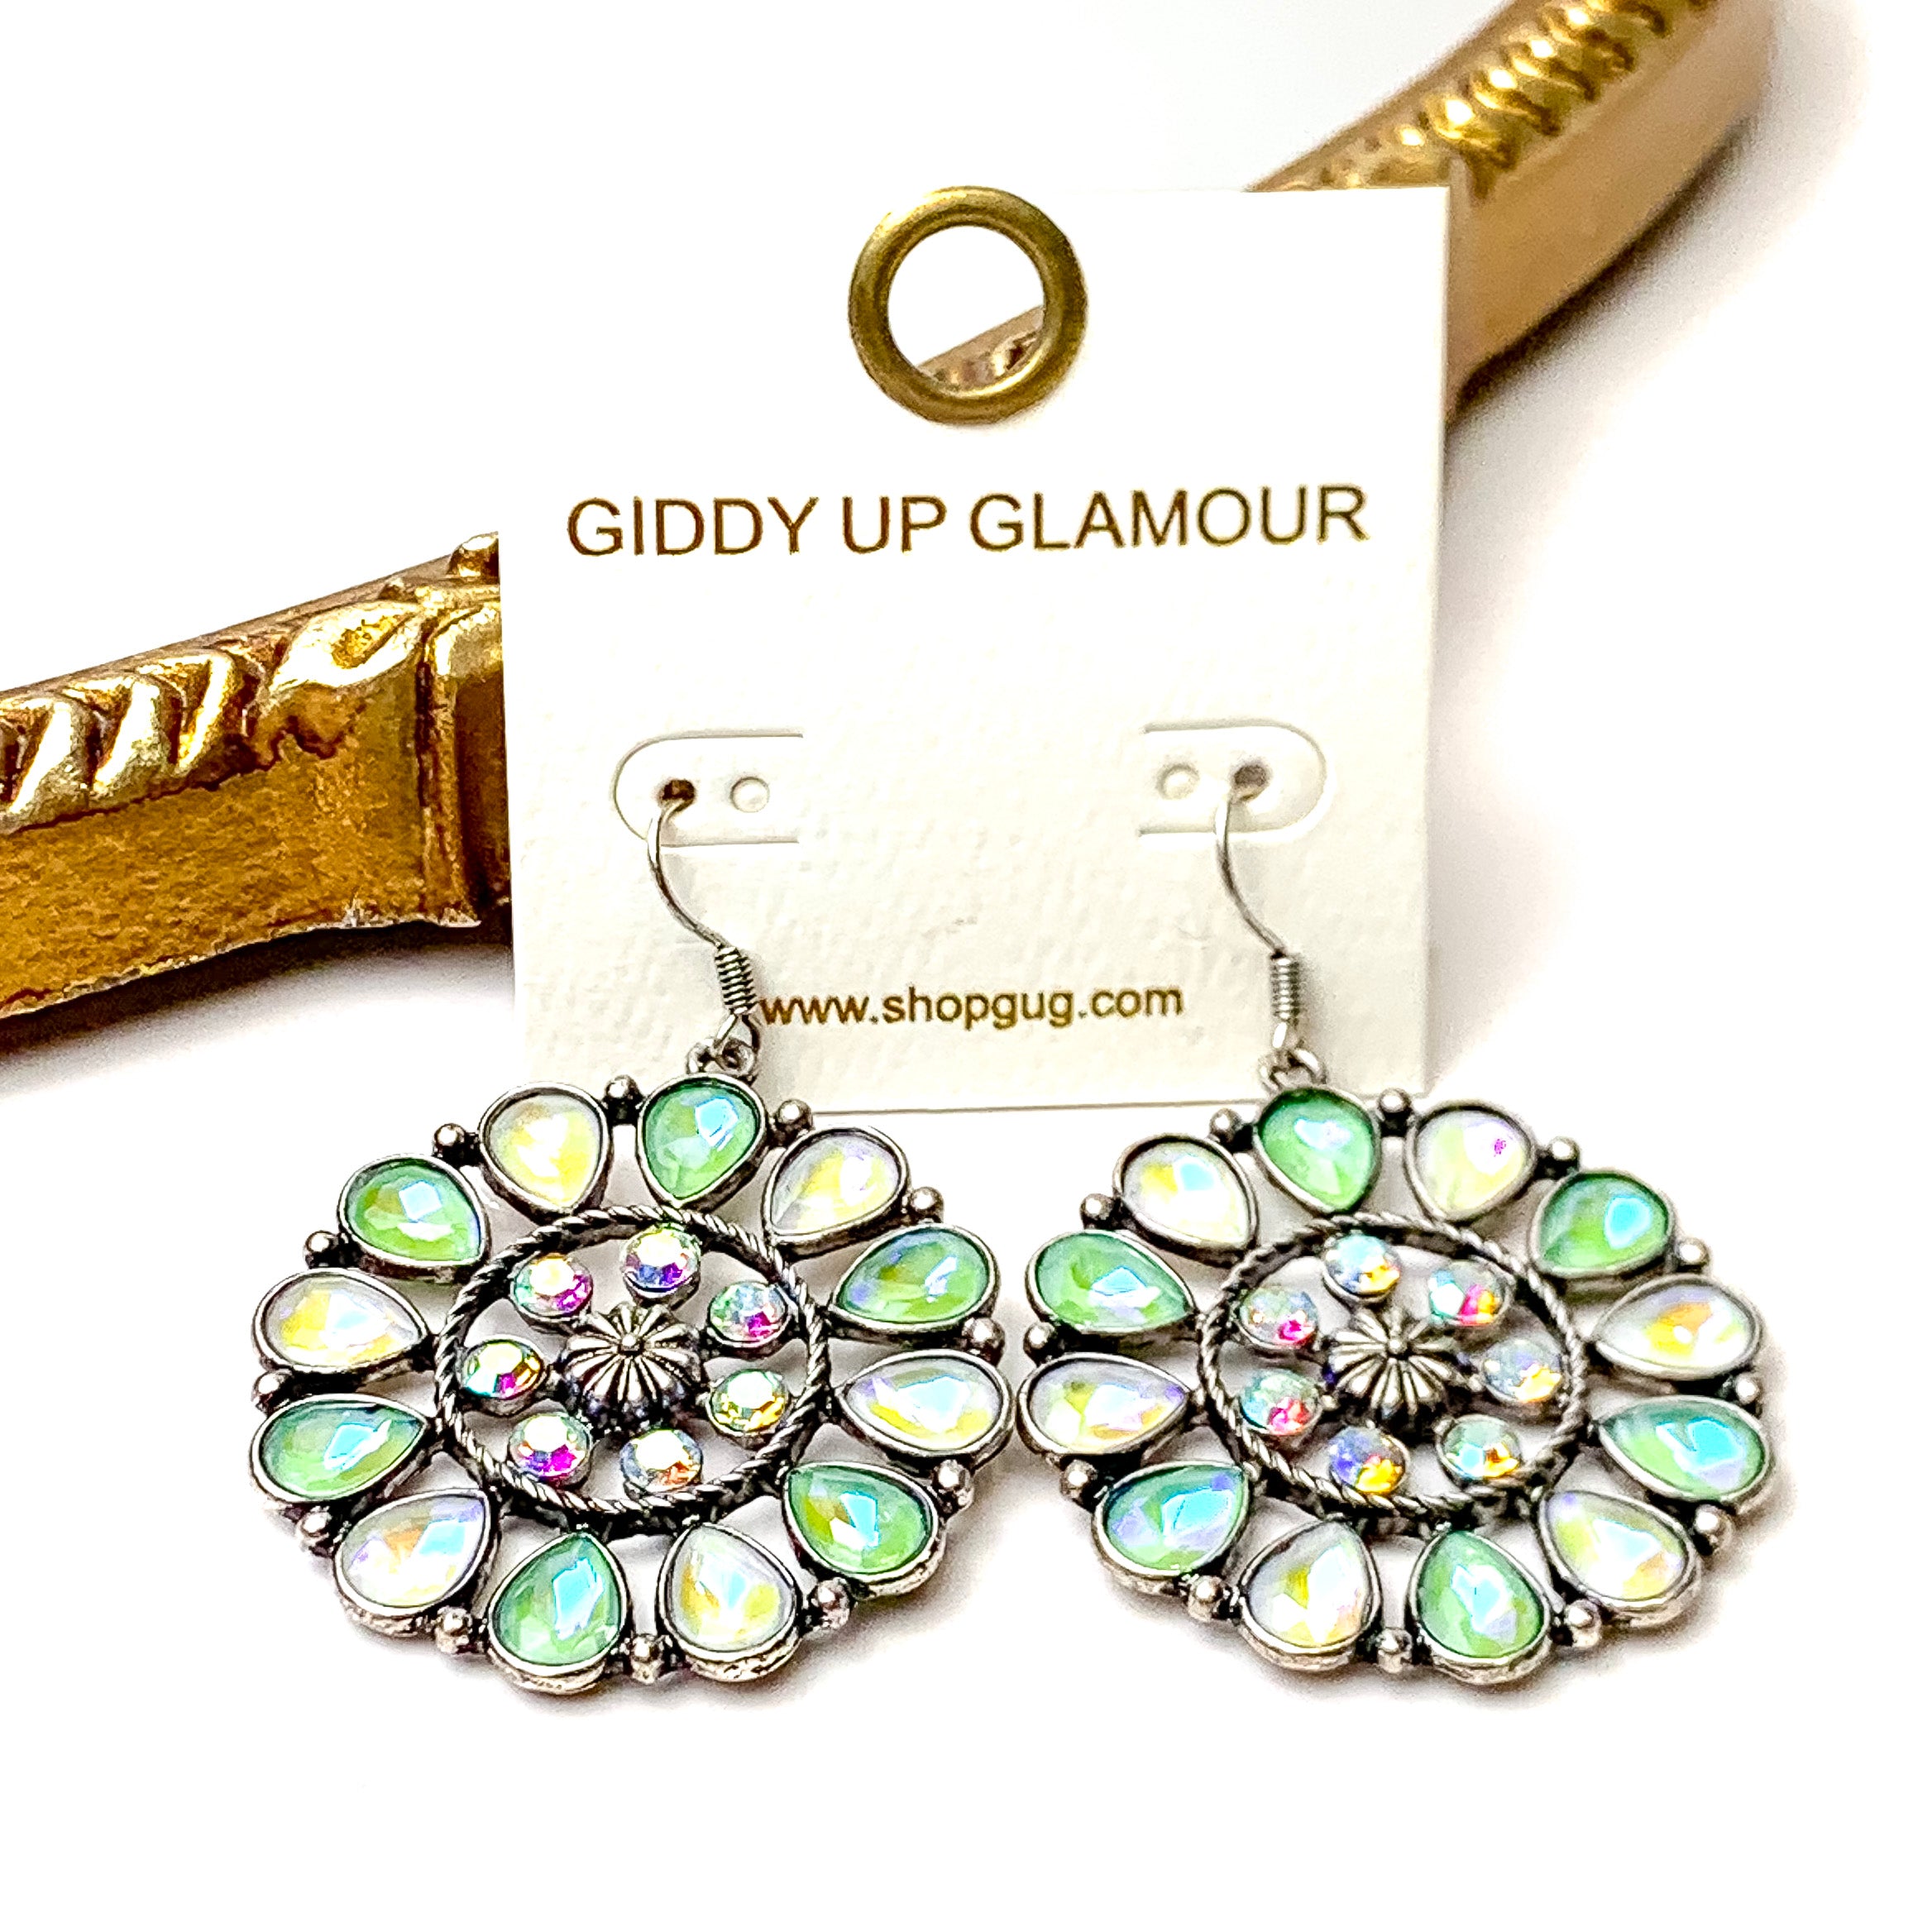 Desert Daisy Silver Tone Flower Concho Drop Earrings in Green and Ivory - Giddy Up Glamour Boutique